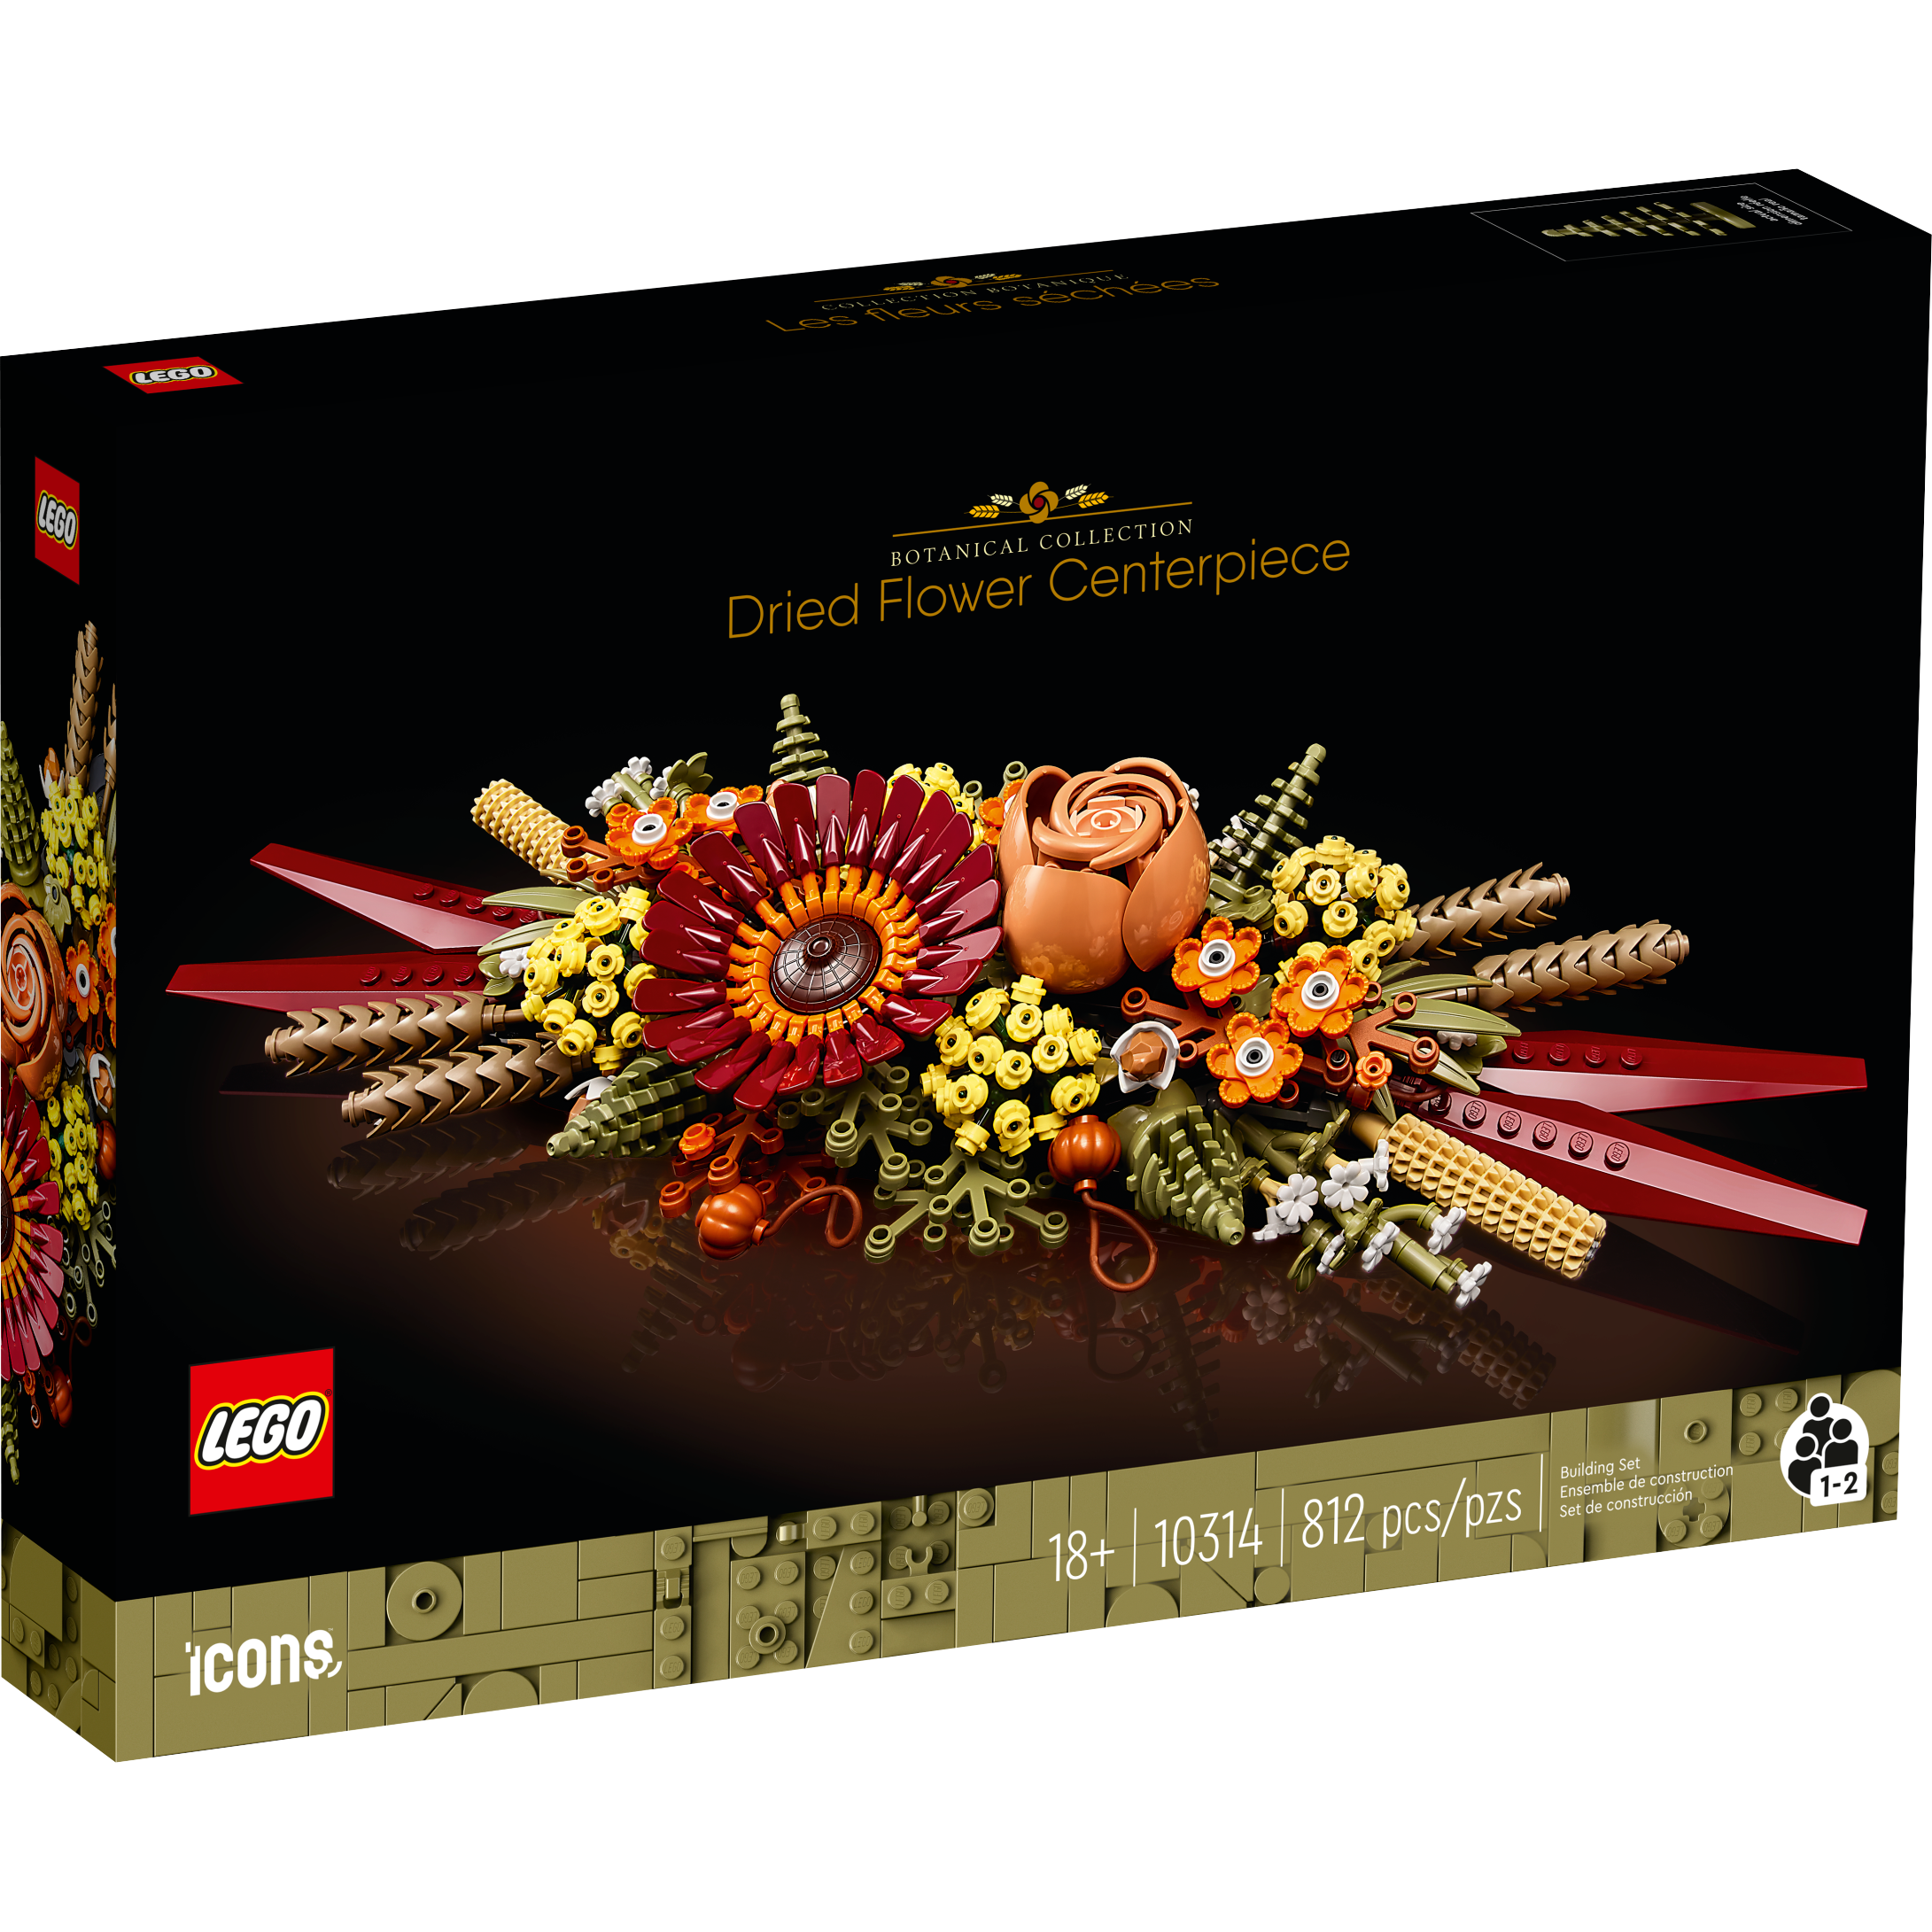 Lego Botanical Collection: Dried Flower Centerpiece 10314